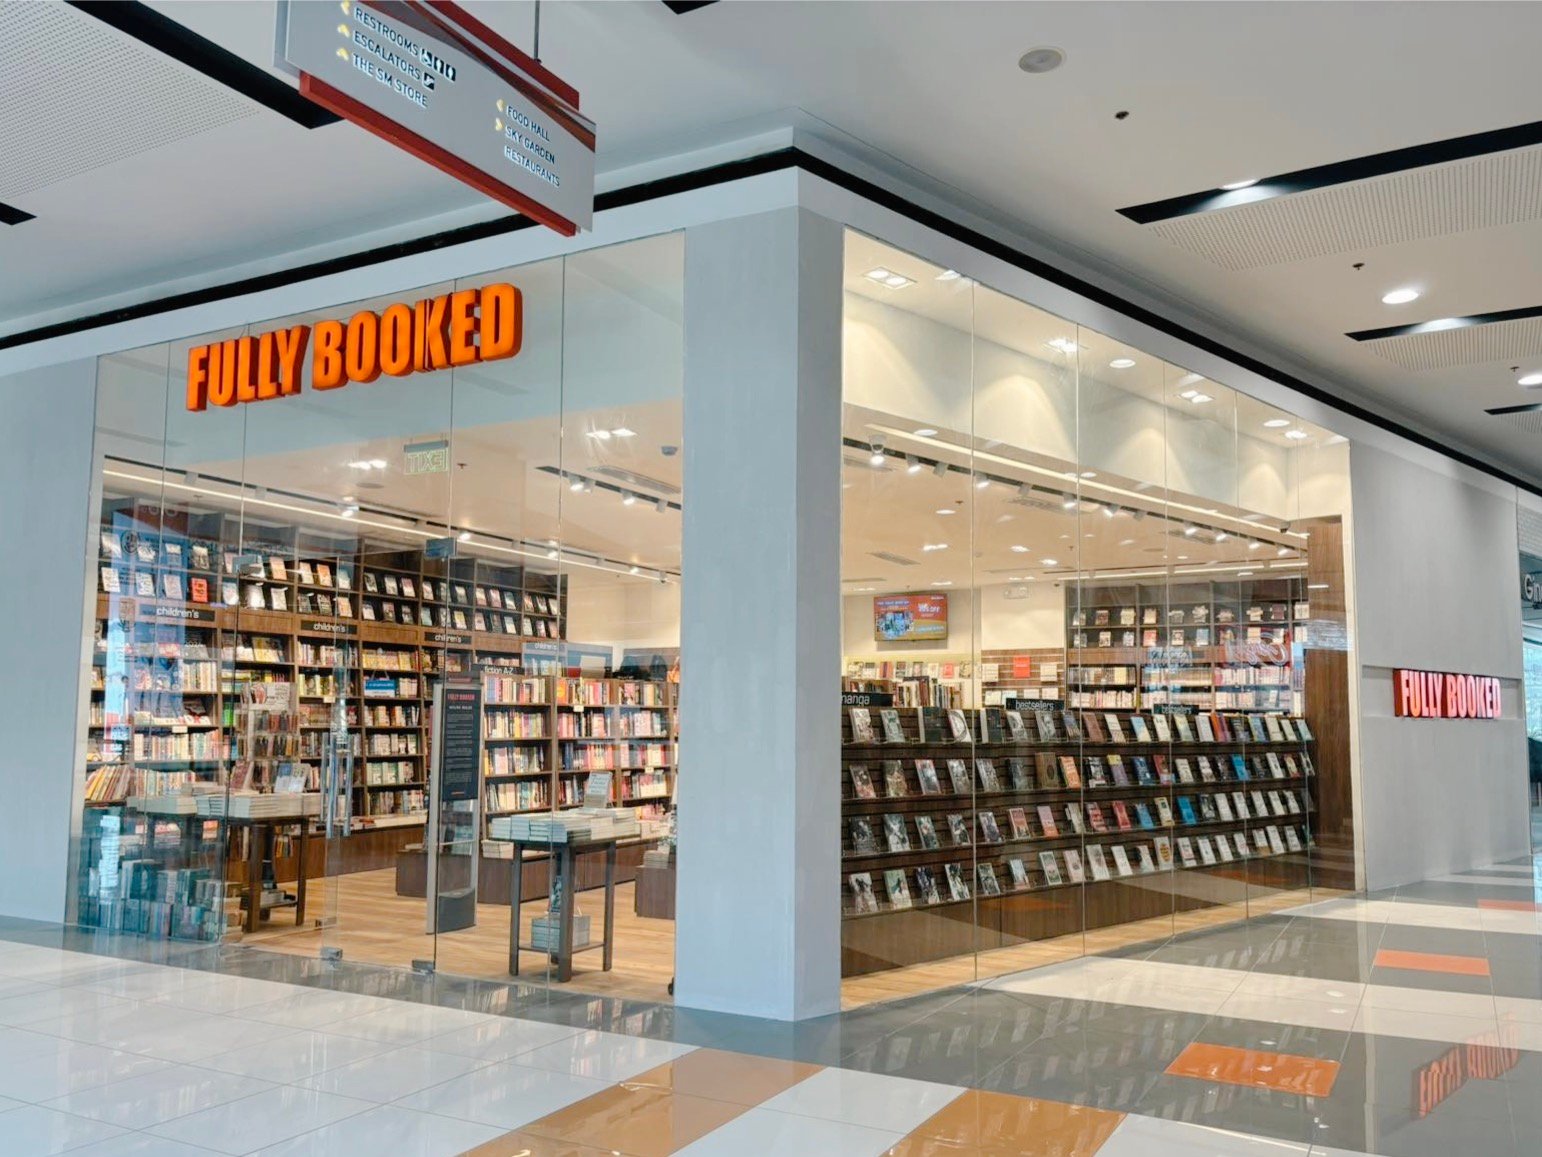 IN PHOTOS: This Is What the Second Fully Booked Store in Davao City Looks Like